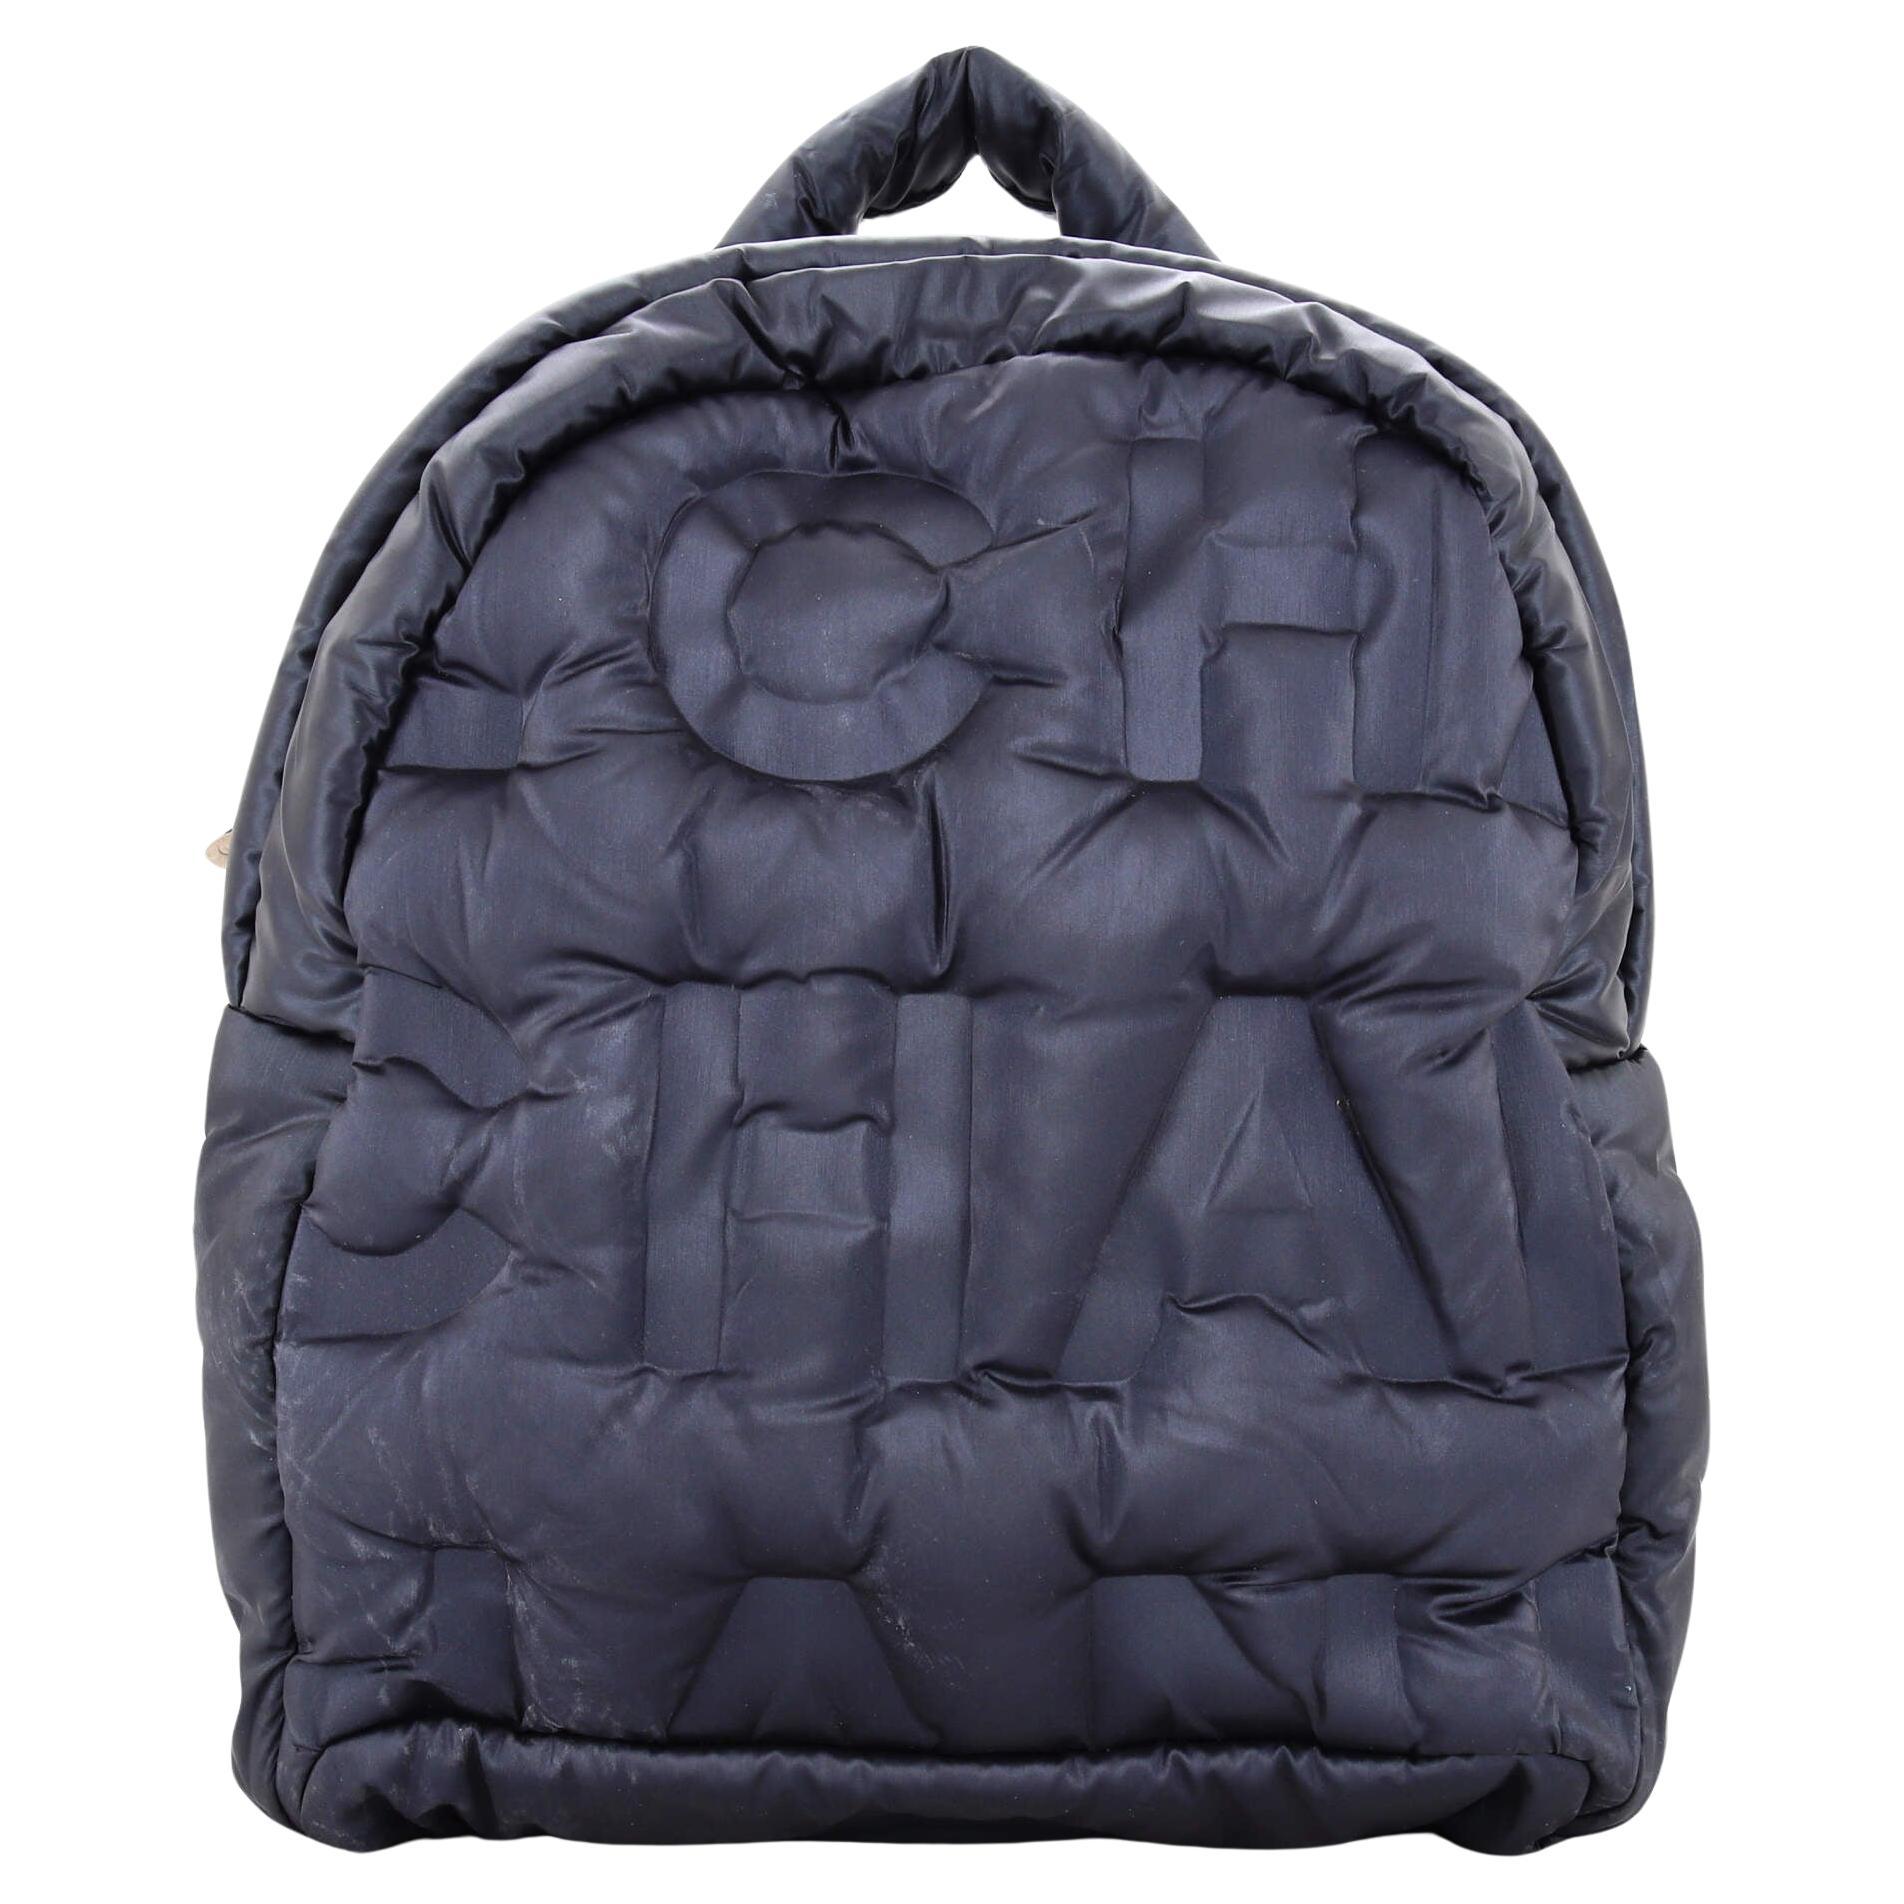 Chanel Doudoune - For Sale on 1stDibs  chanel puffer backpack, doudoune  chanel, chanel doudoune bag